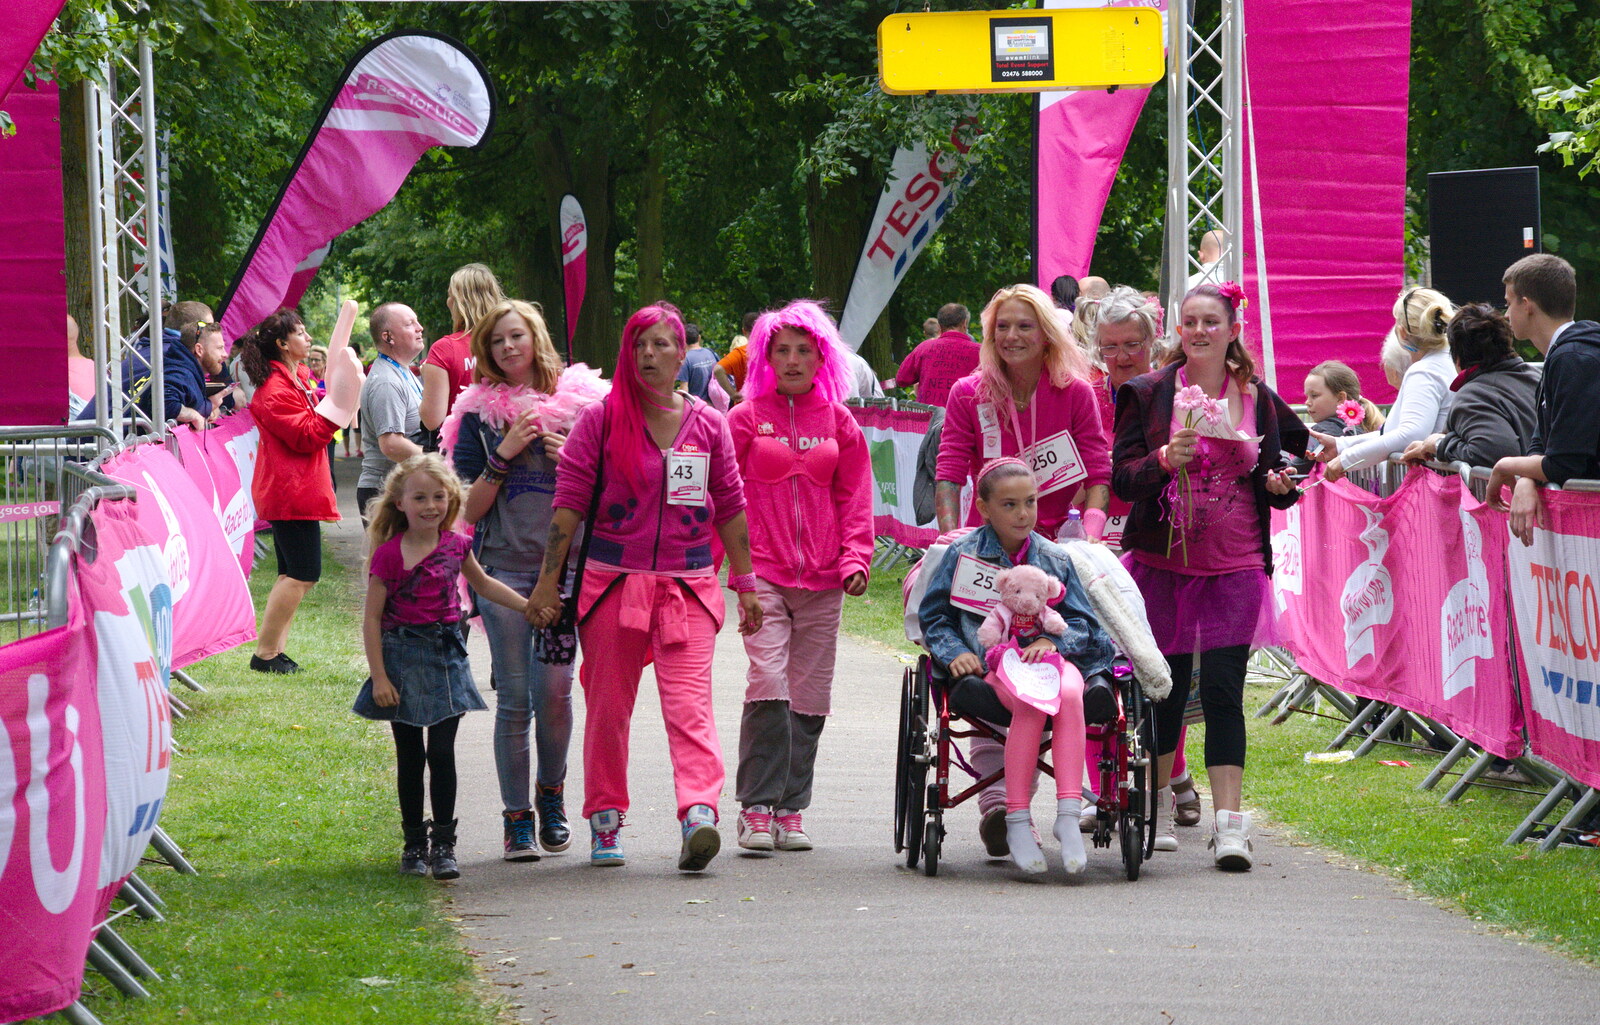 More walkers cross the line from Isobel's Race For Life, Chantry Park, Ipswich - 11th June 2014